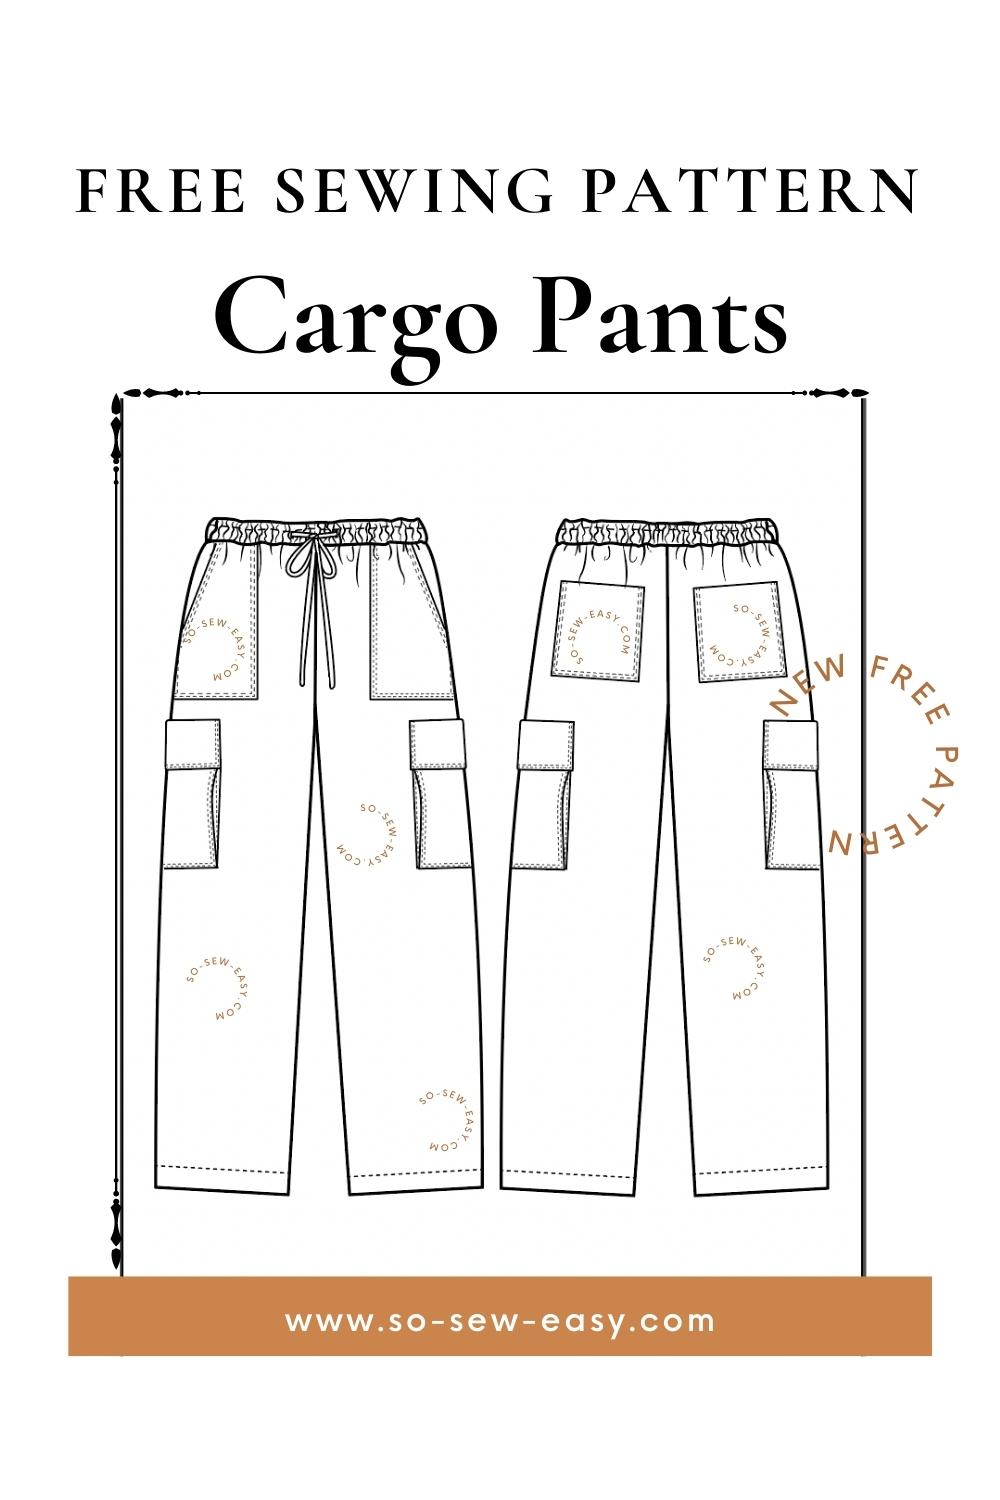 Do you need cargo pants outfit ideas? Here's 5 ways I'm styling my plus  size cargo pants for spring. My fave looks are the orange b